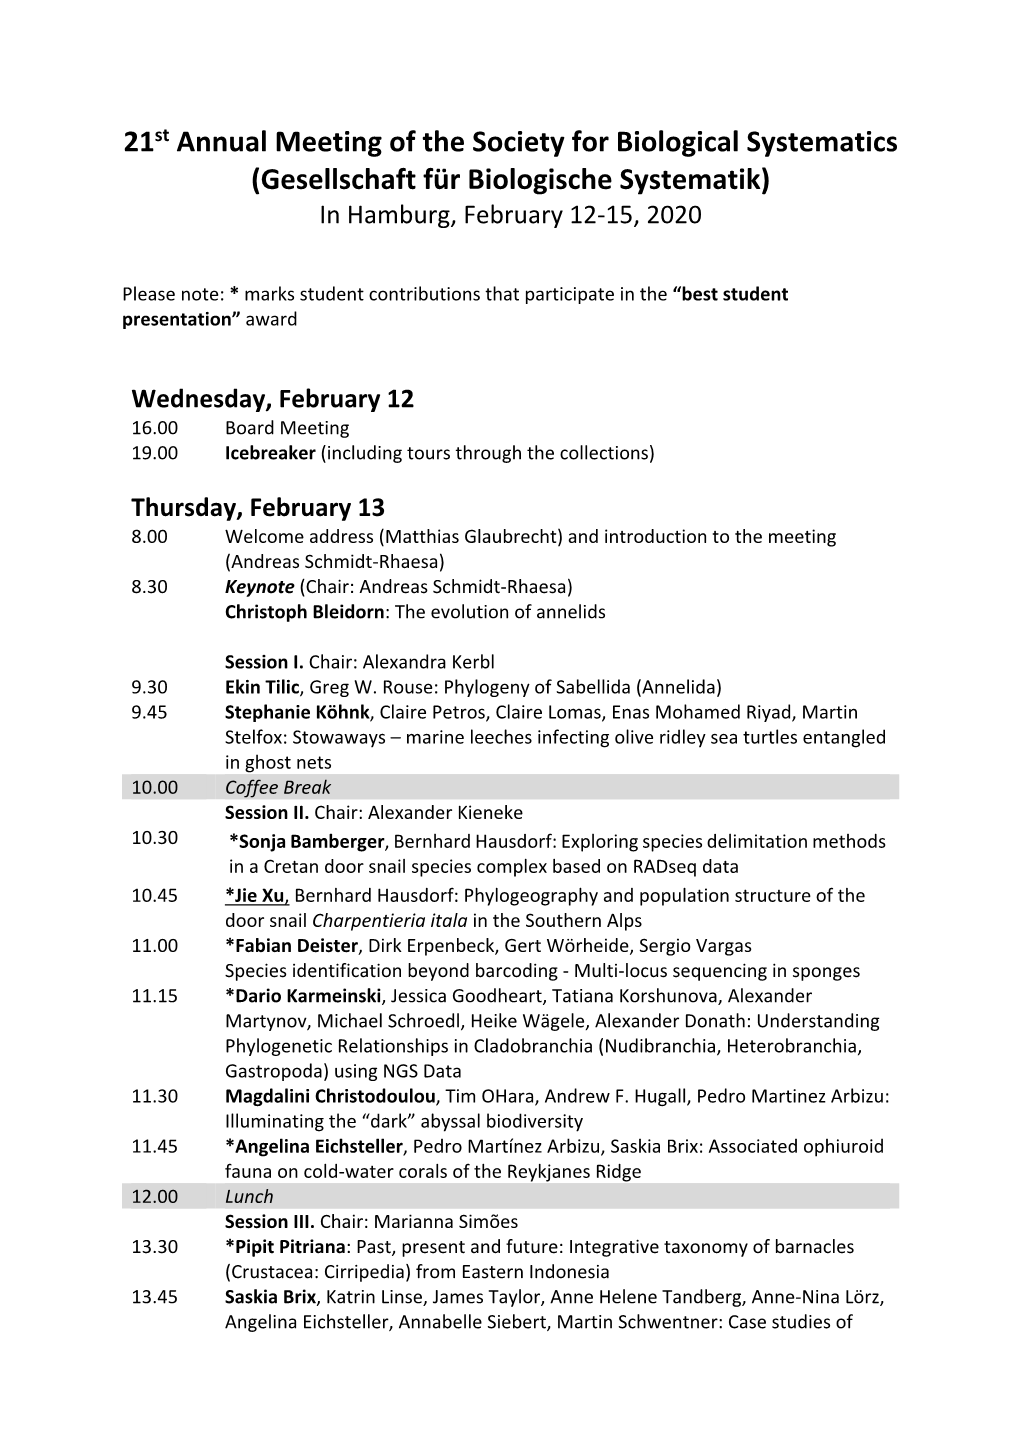 21St Annual Meeting of the Society for Biological Systematics (Gesellschaft Für Biologische Systematik) in Hamburg, February 12‐15, 2020